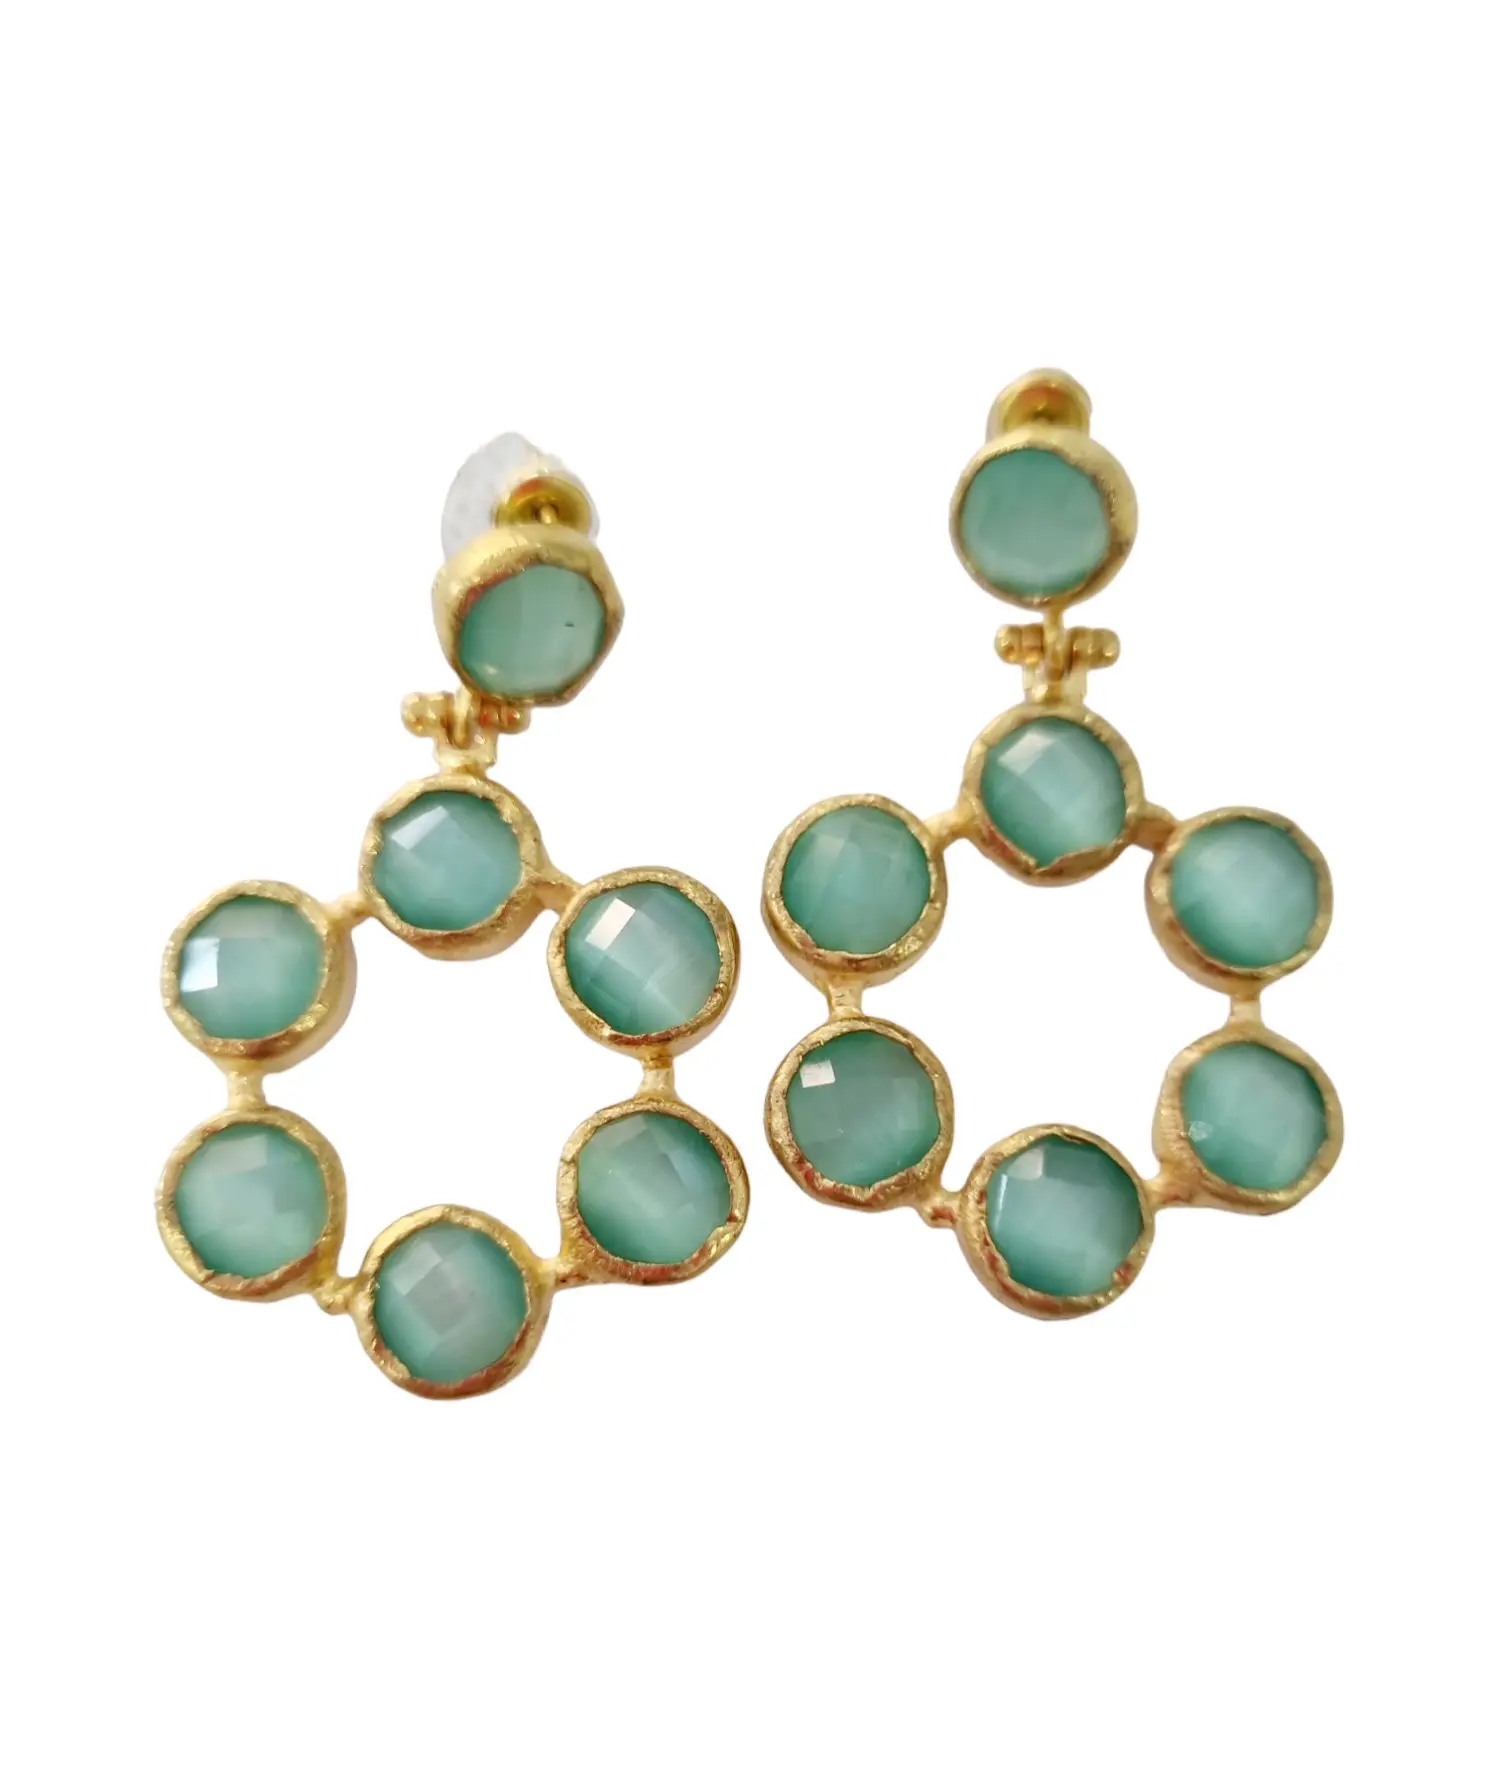 Earrings made with cat's eye surrounded by brass. Aqua green colour. Length 4.5cm Weight 7.3gr